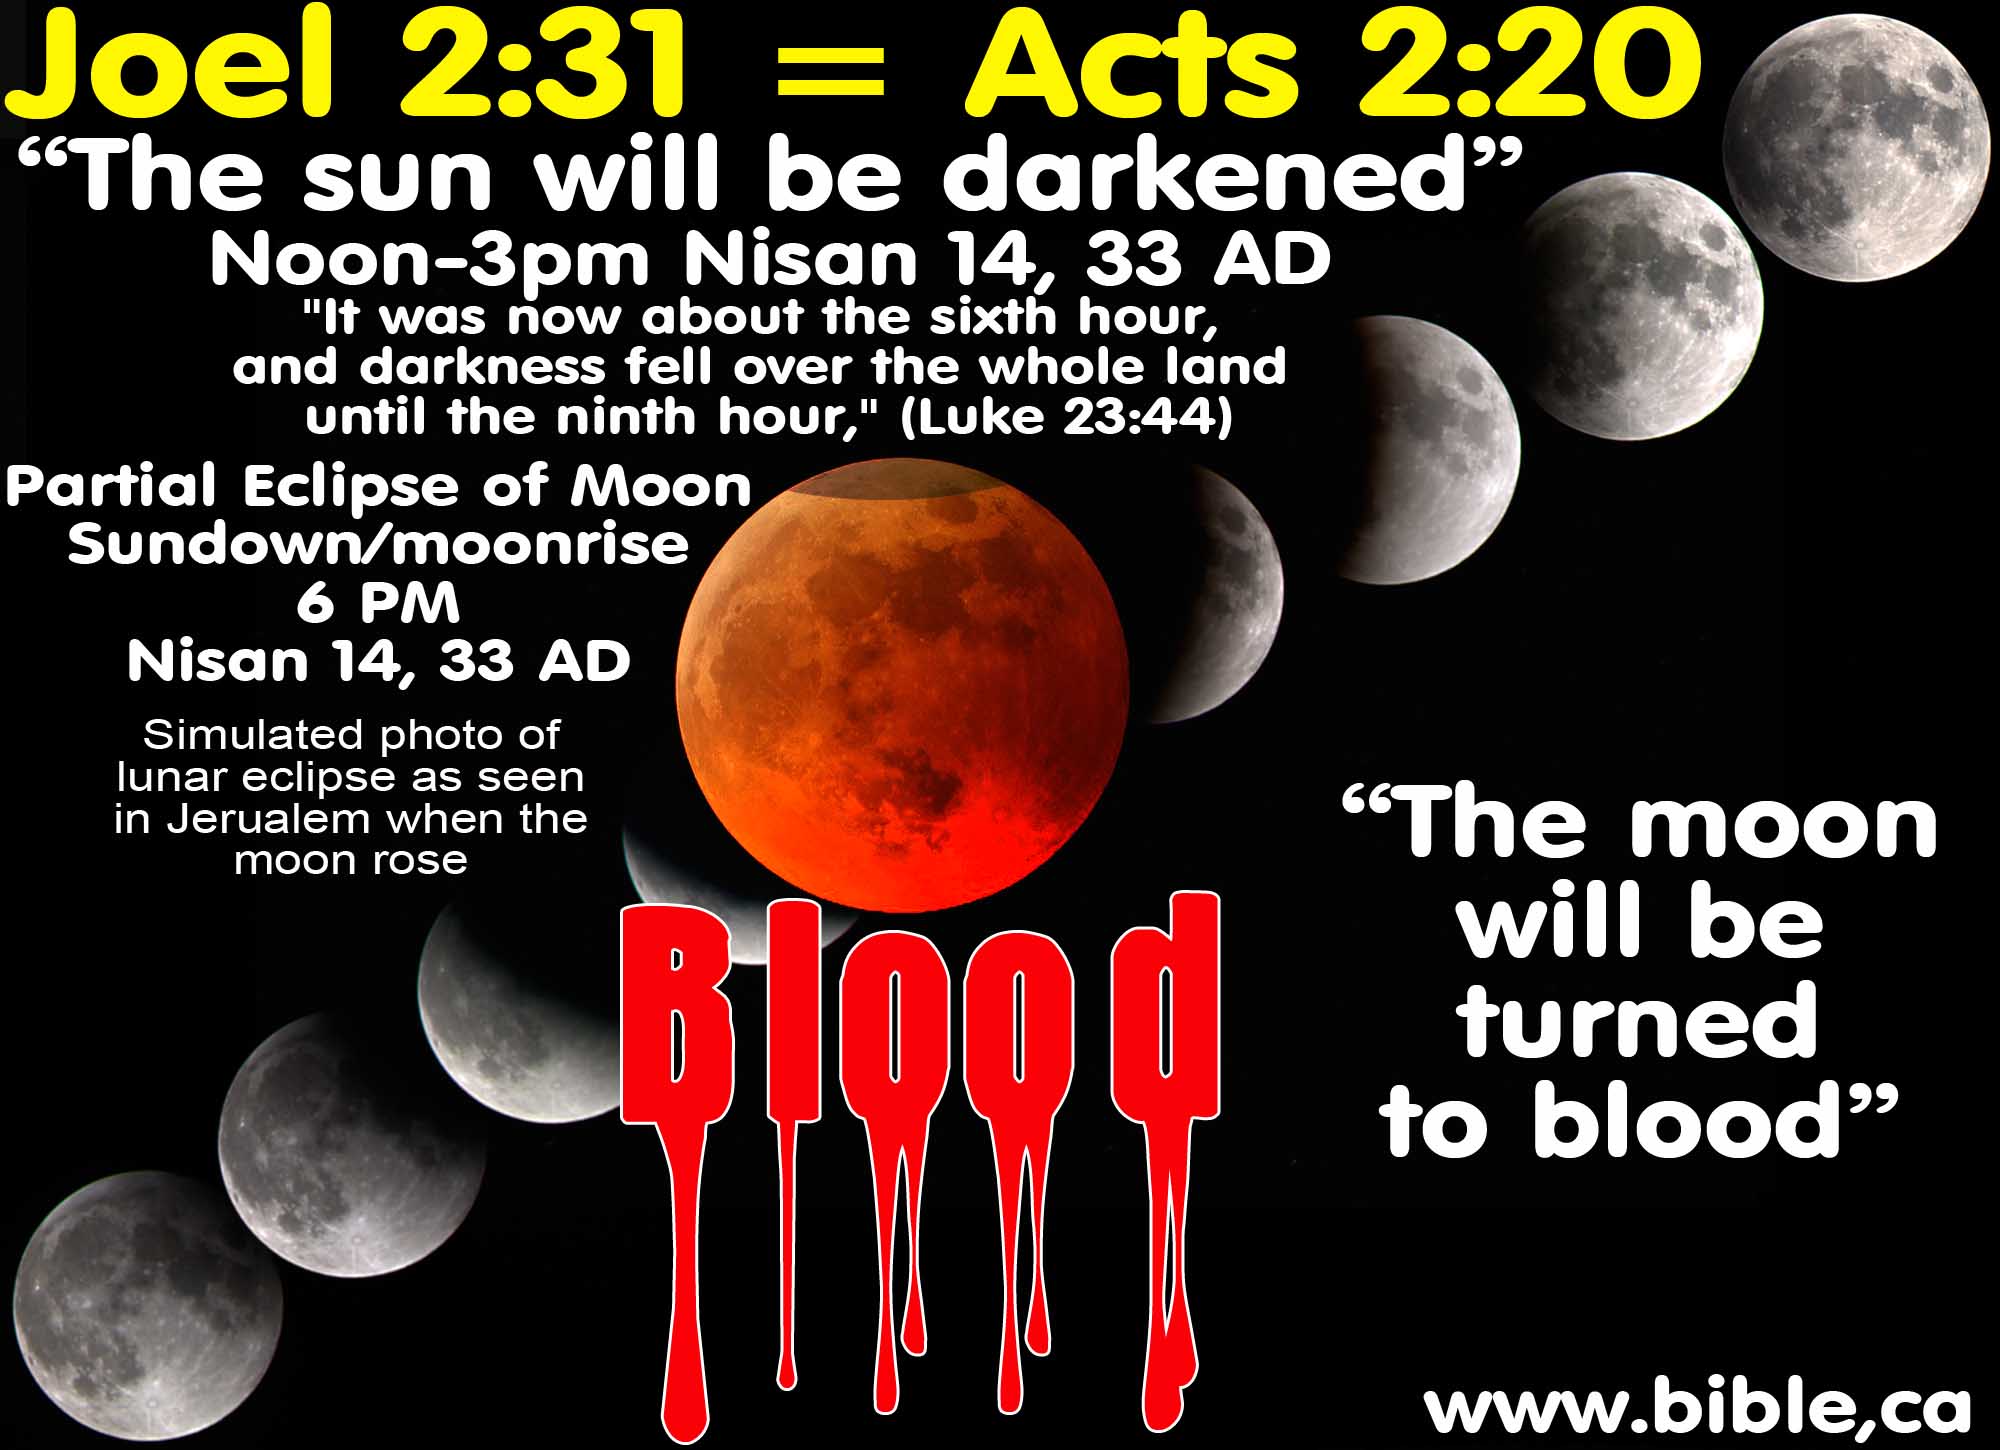 jesus-christ-died-death-cross-eclipse-red-blood-moon-3-april-33ad-joel2-31-acts2-28-lunar-eclipse-nisan14-33ad-sun-darkened-moon-turned-to-blood-title.jpg